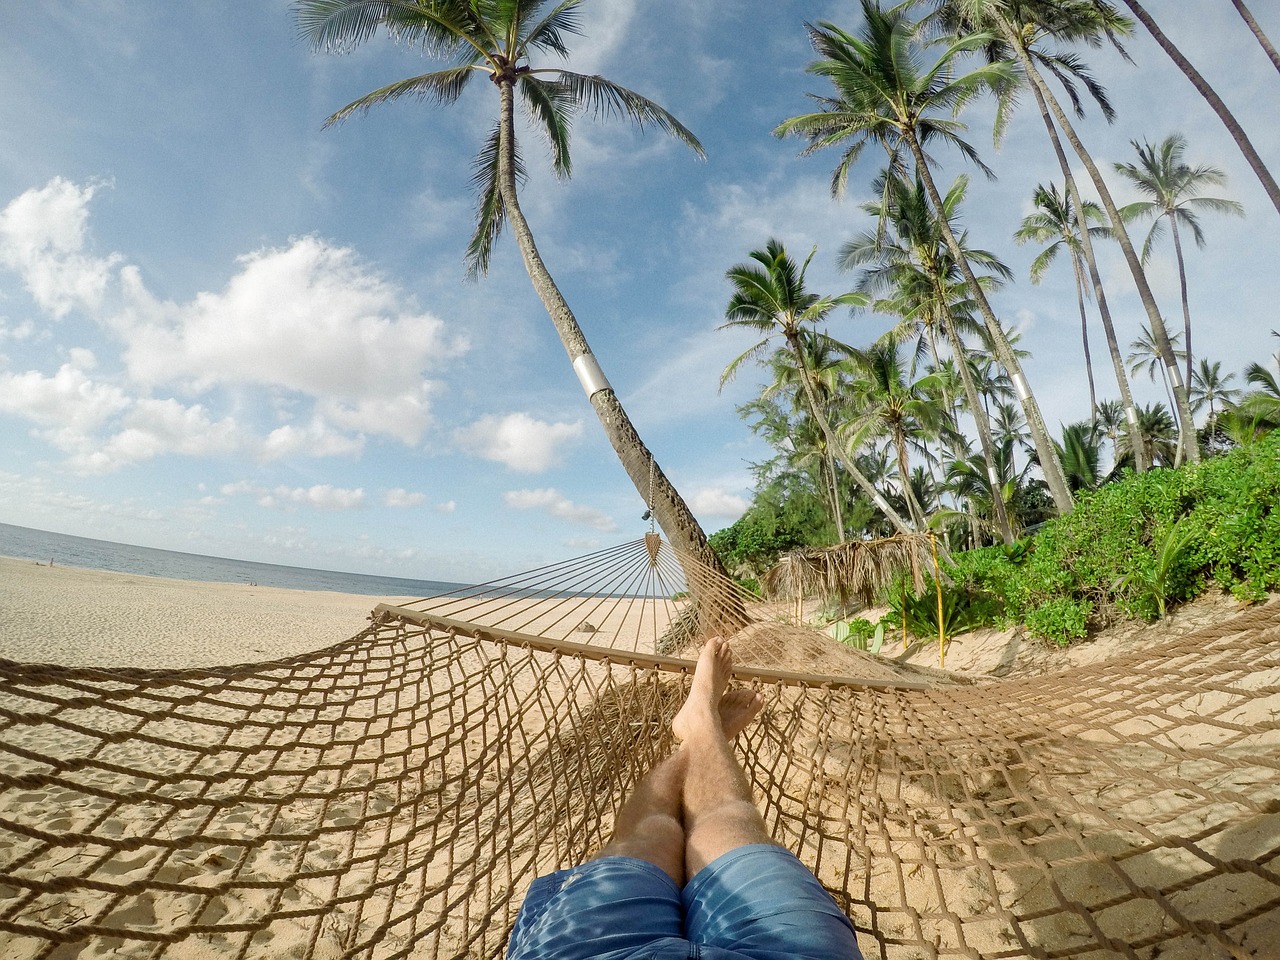 a person laying in a hammock on a beach, by Matt Stewart, net art, low - angle go - pro view, coconut trees, adam narozanski, peaceful day